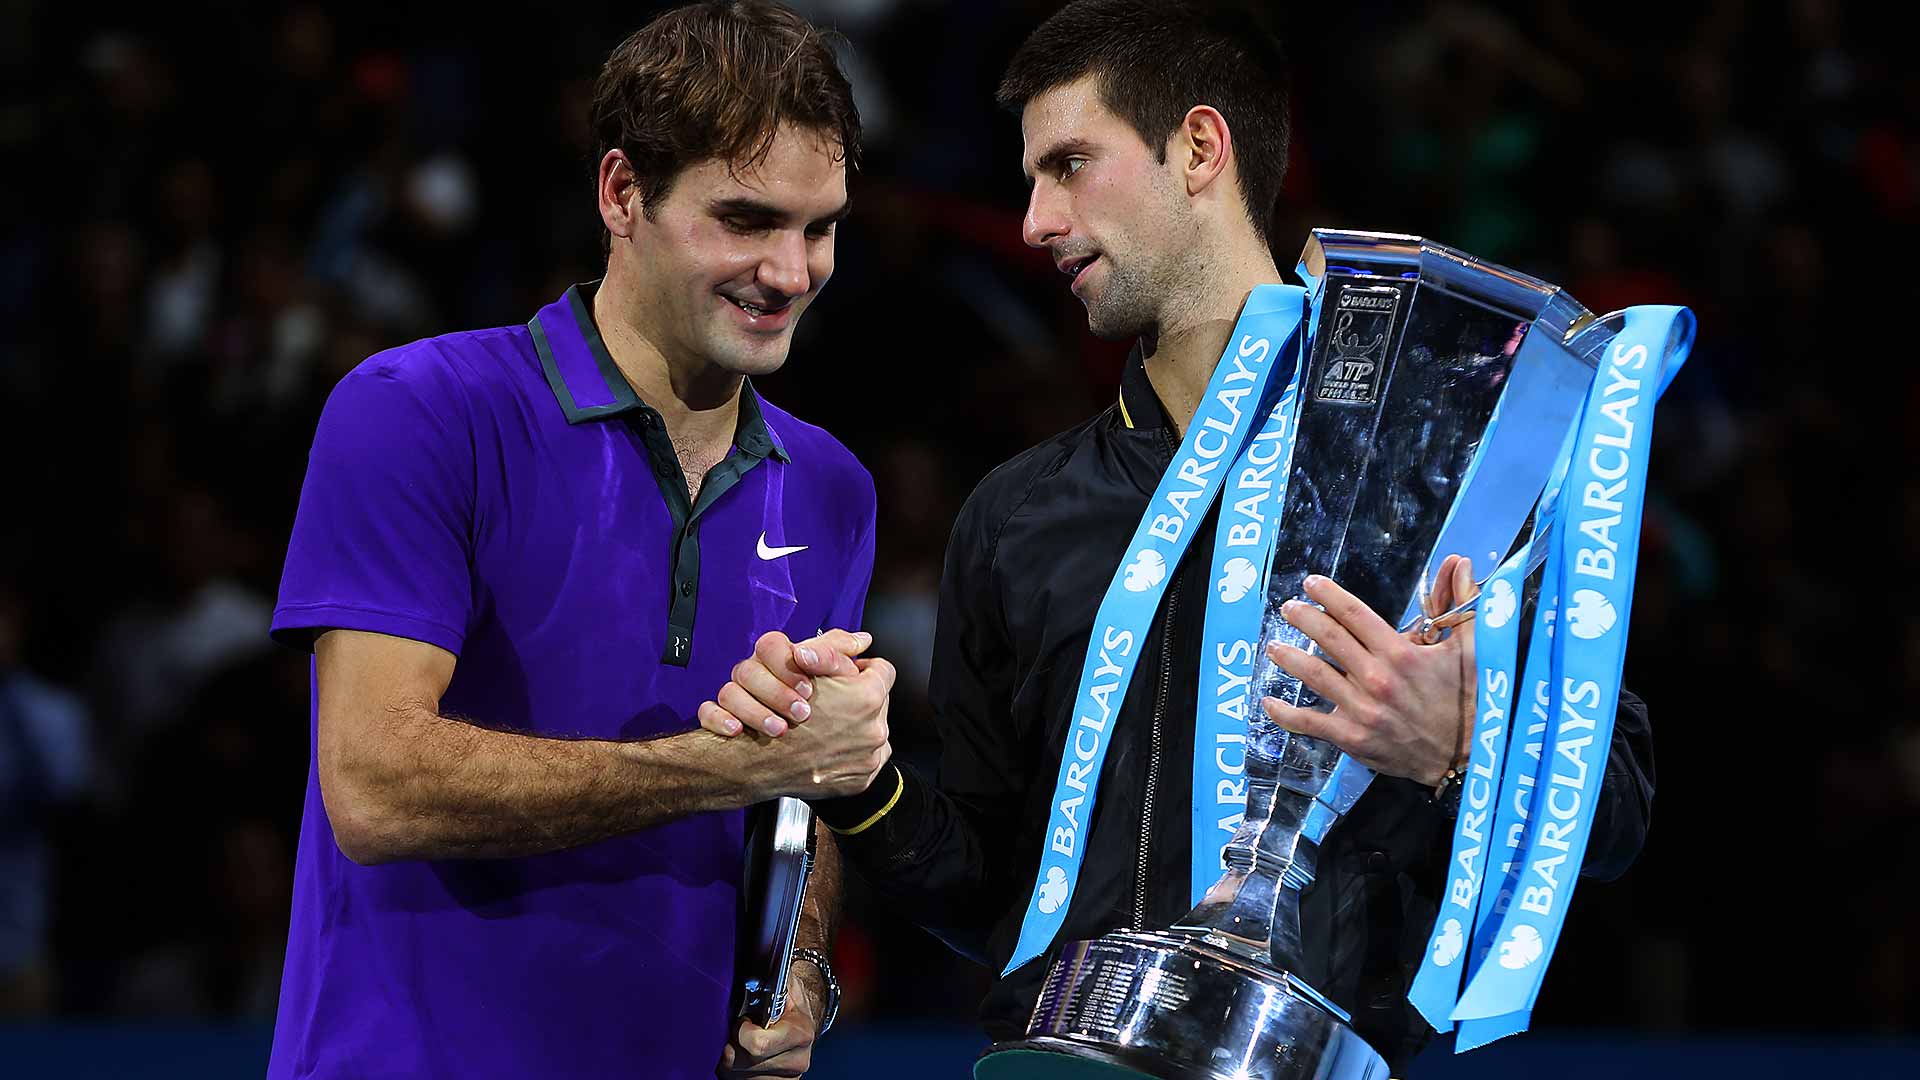 Roger Federer congratulates Novak Djokovic on his victory at the 2012 Barclays ATP World Tour Finals.